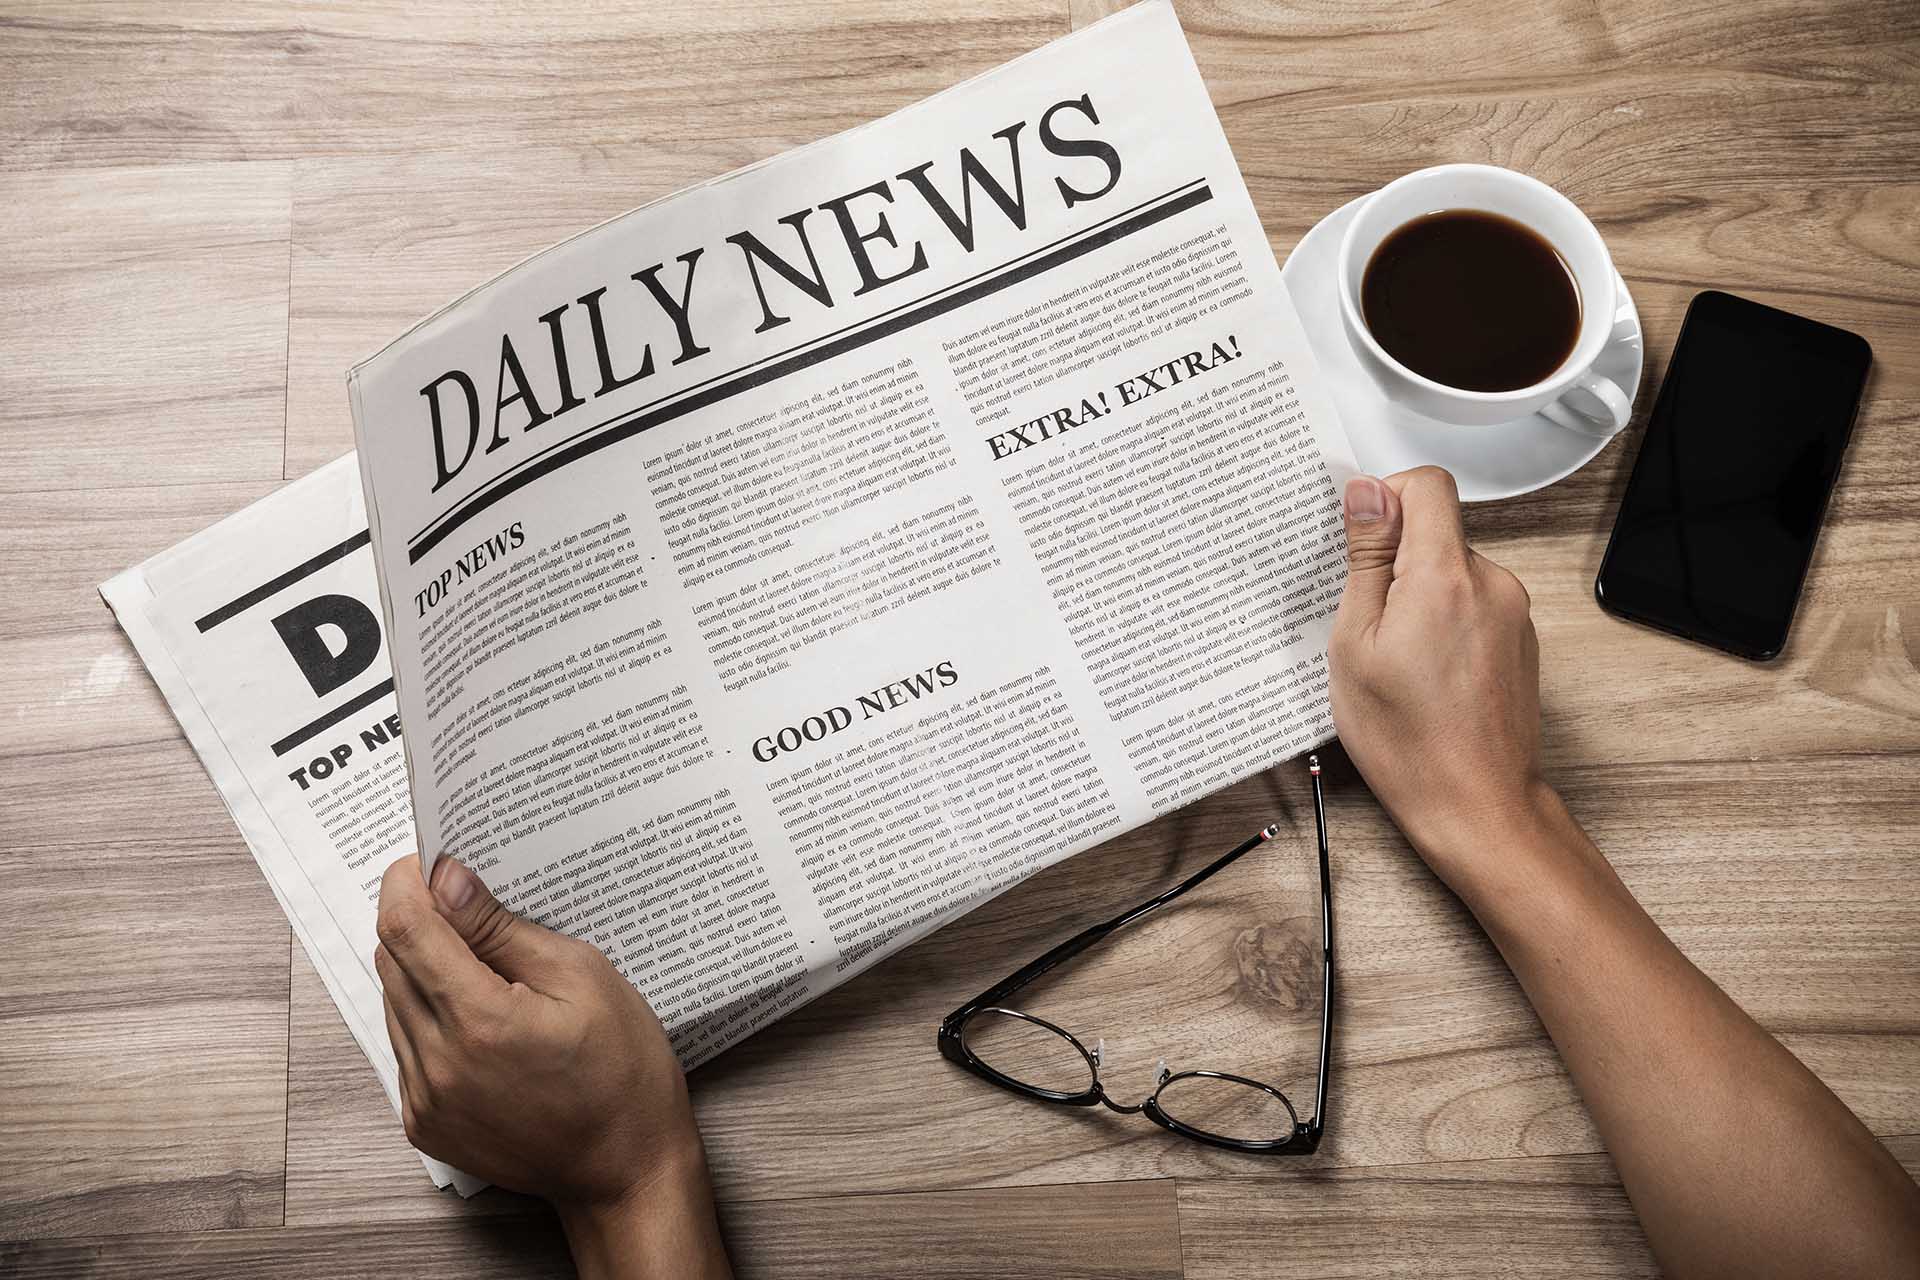 A newspaper showing the daily news page beside a cup of coffee, mobile phone, and eyeglasses.